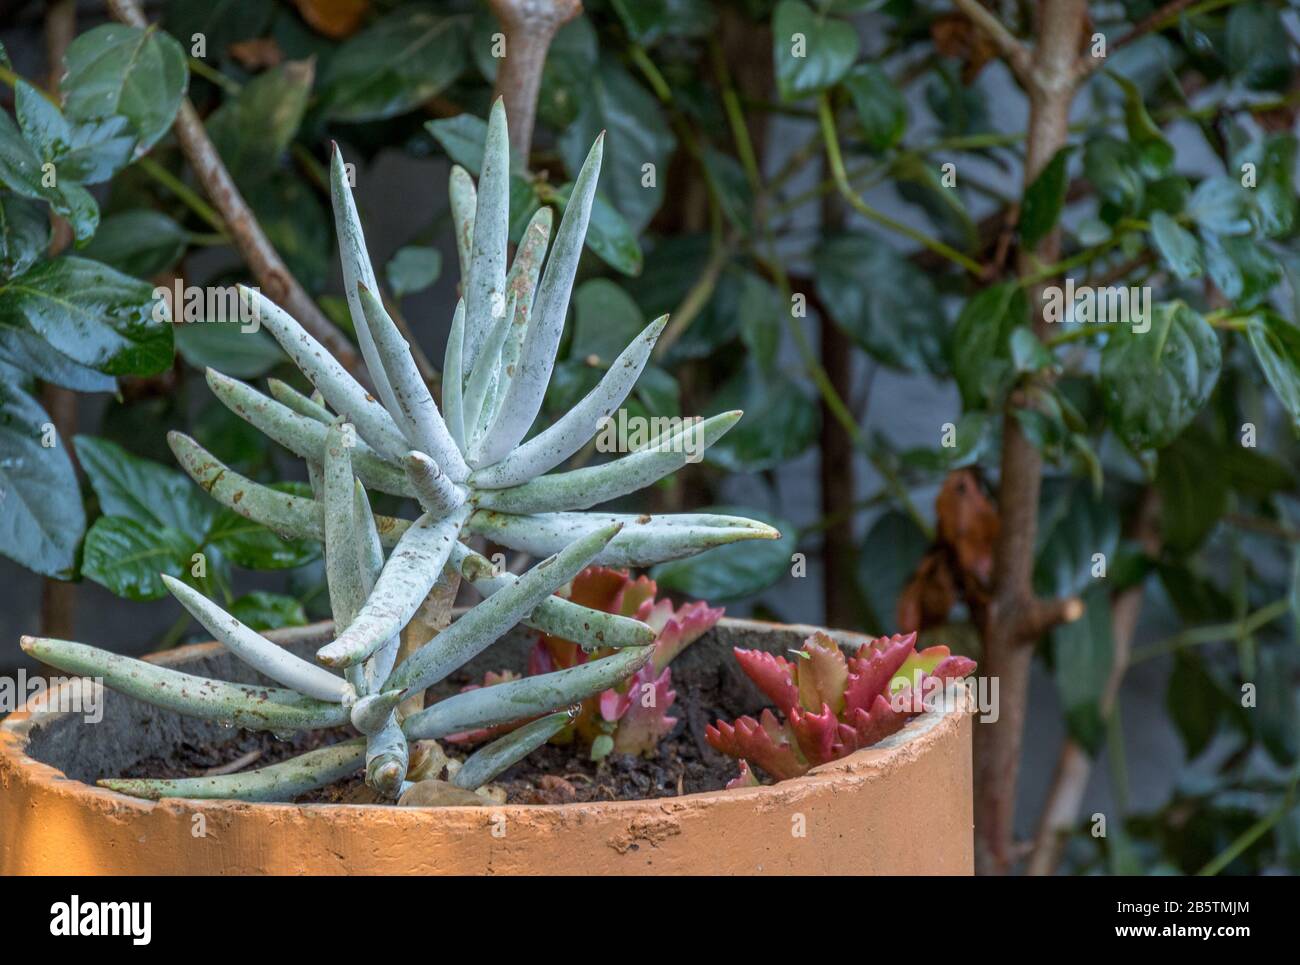 Succulent plants in an outside pot in a garden image in horizontal format Stock Photo